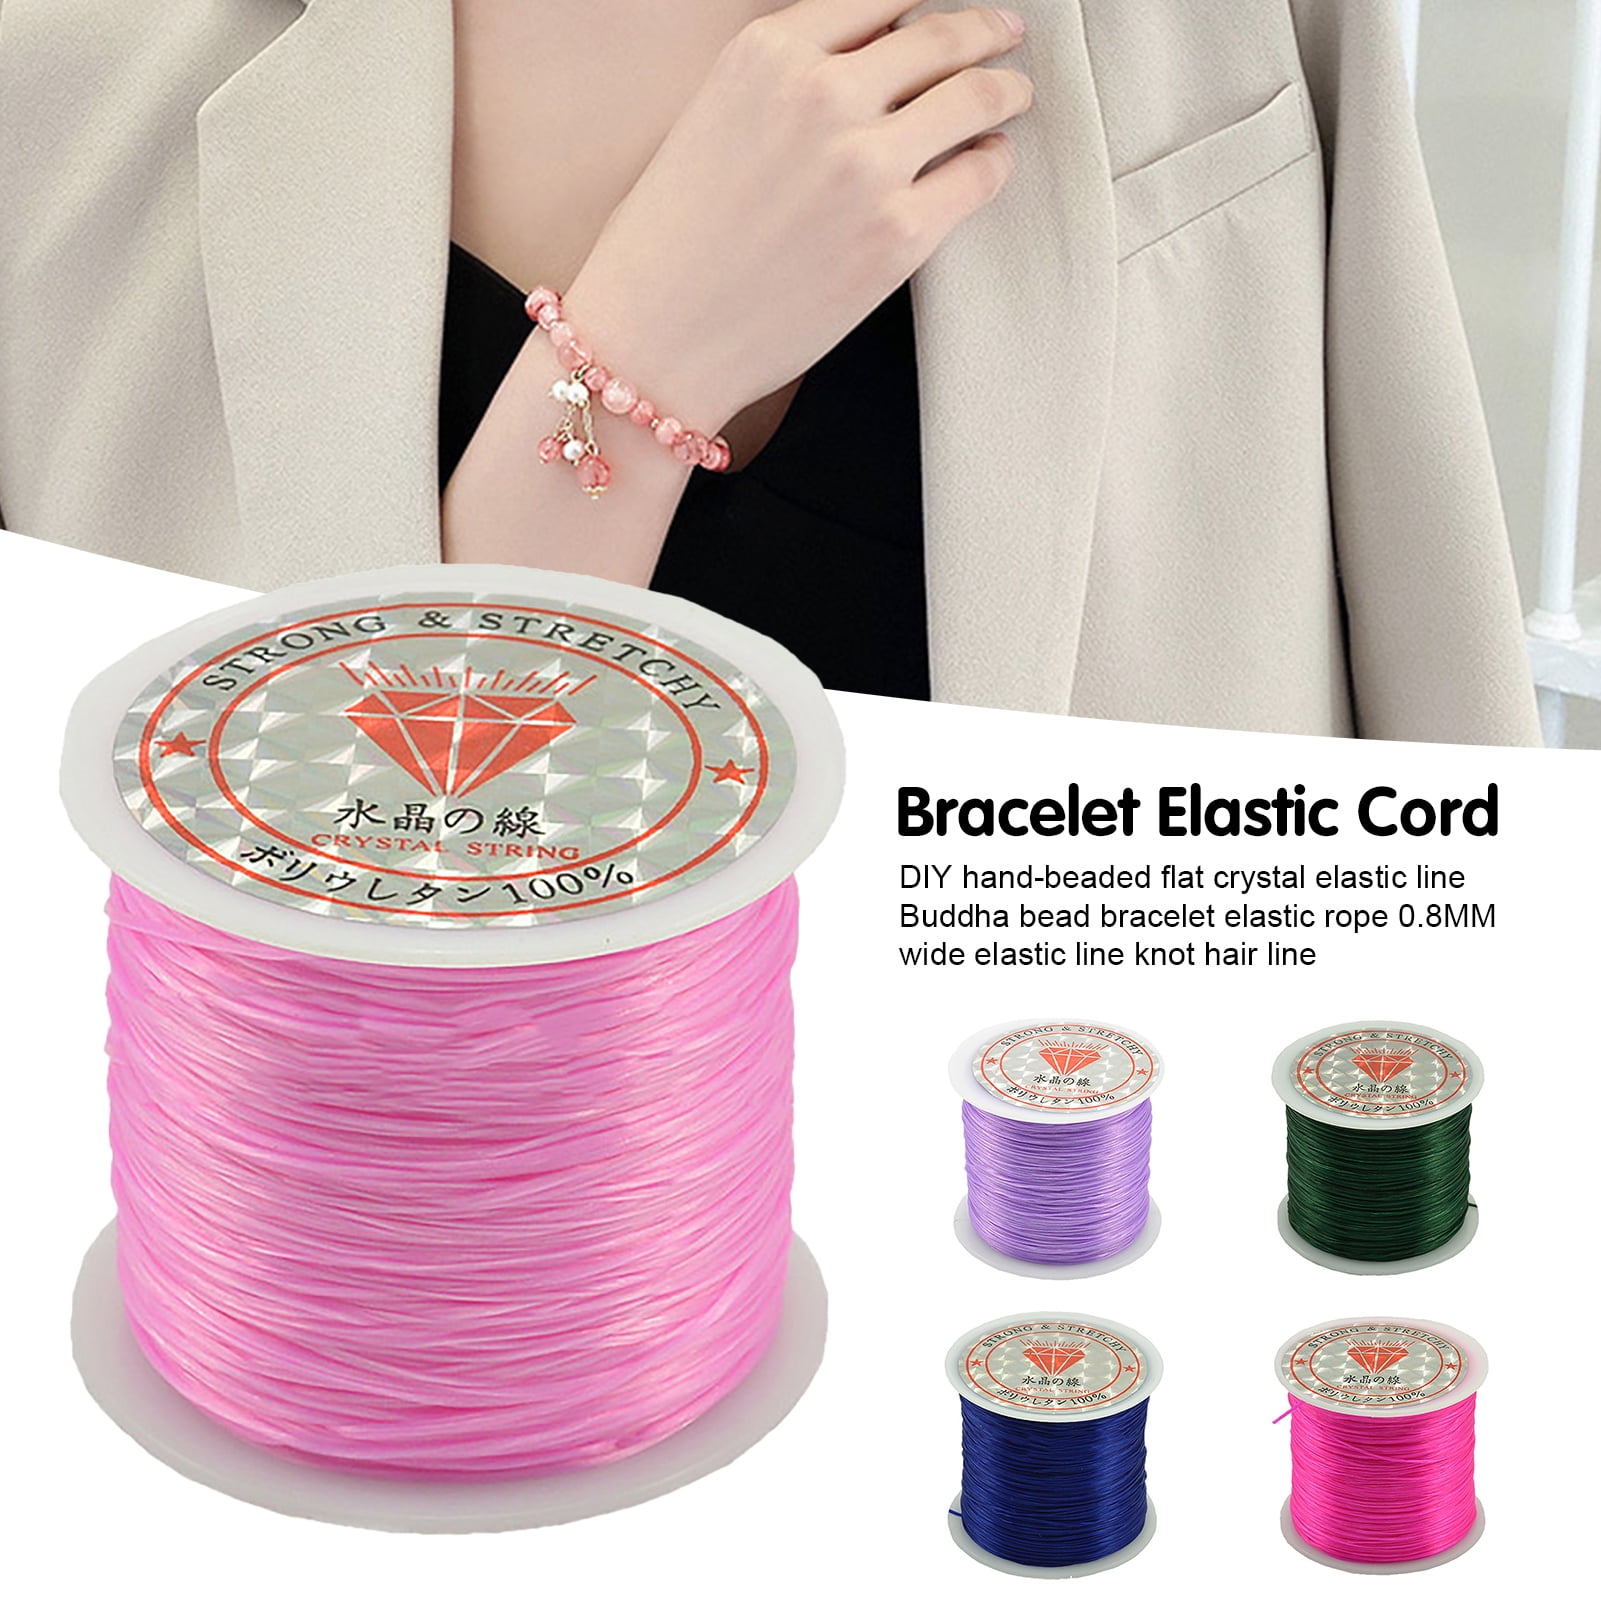  Stretch Magic Bead & Jewelry Cord - Strong & Stretchy, Easy to  Knot - Clear Color - 0.8mm Diameter - 100-meter (328 ft) Spool - Elastic  String for Making Beaded Jewelry